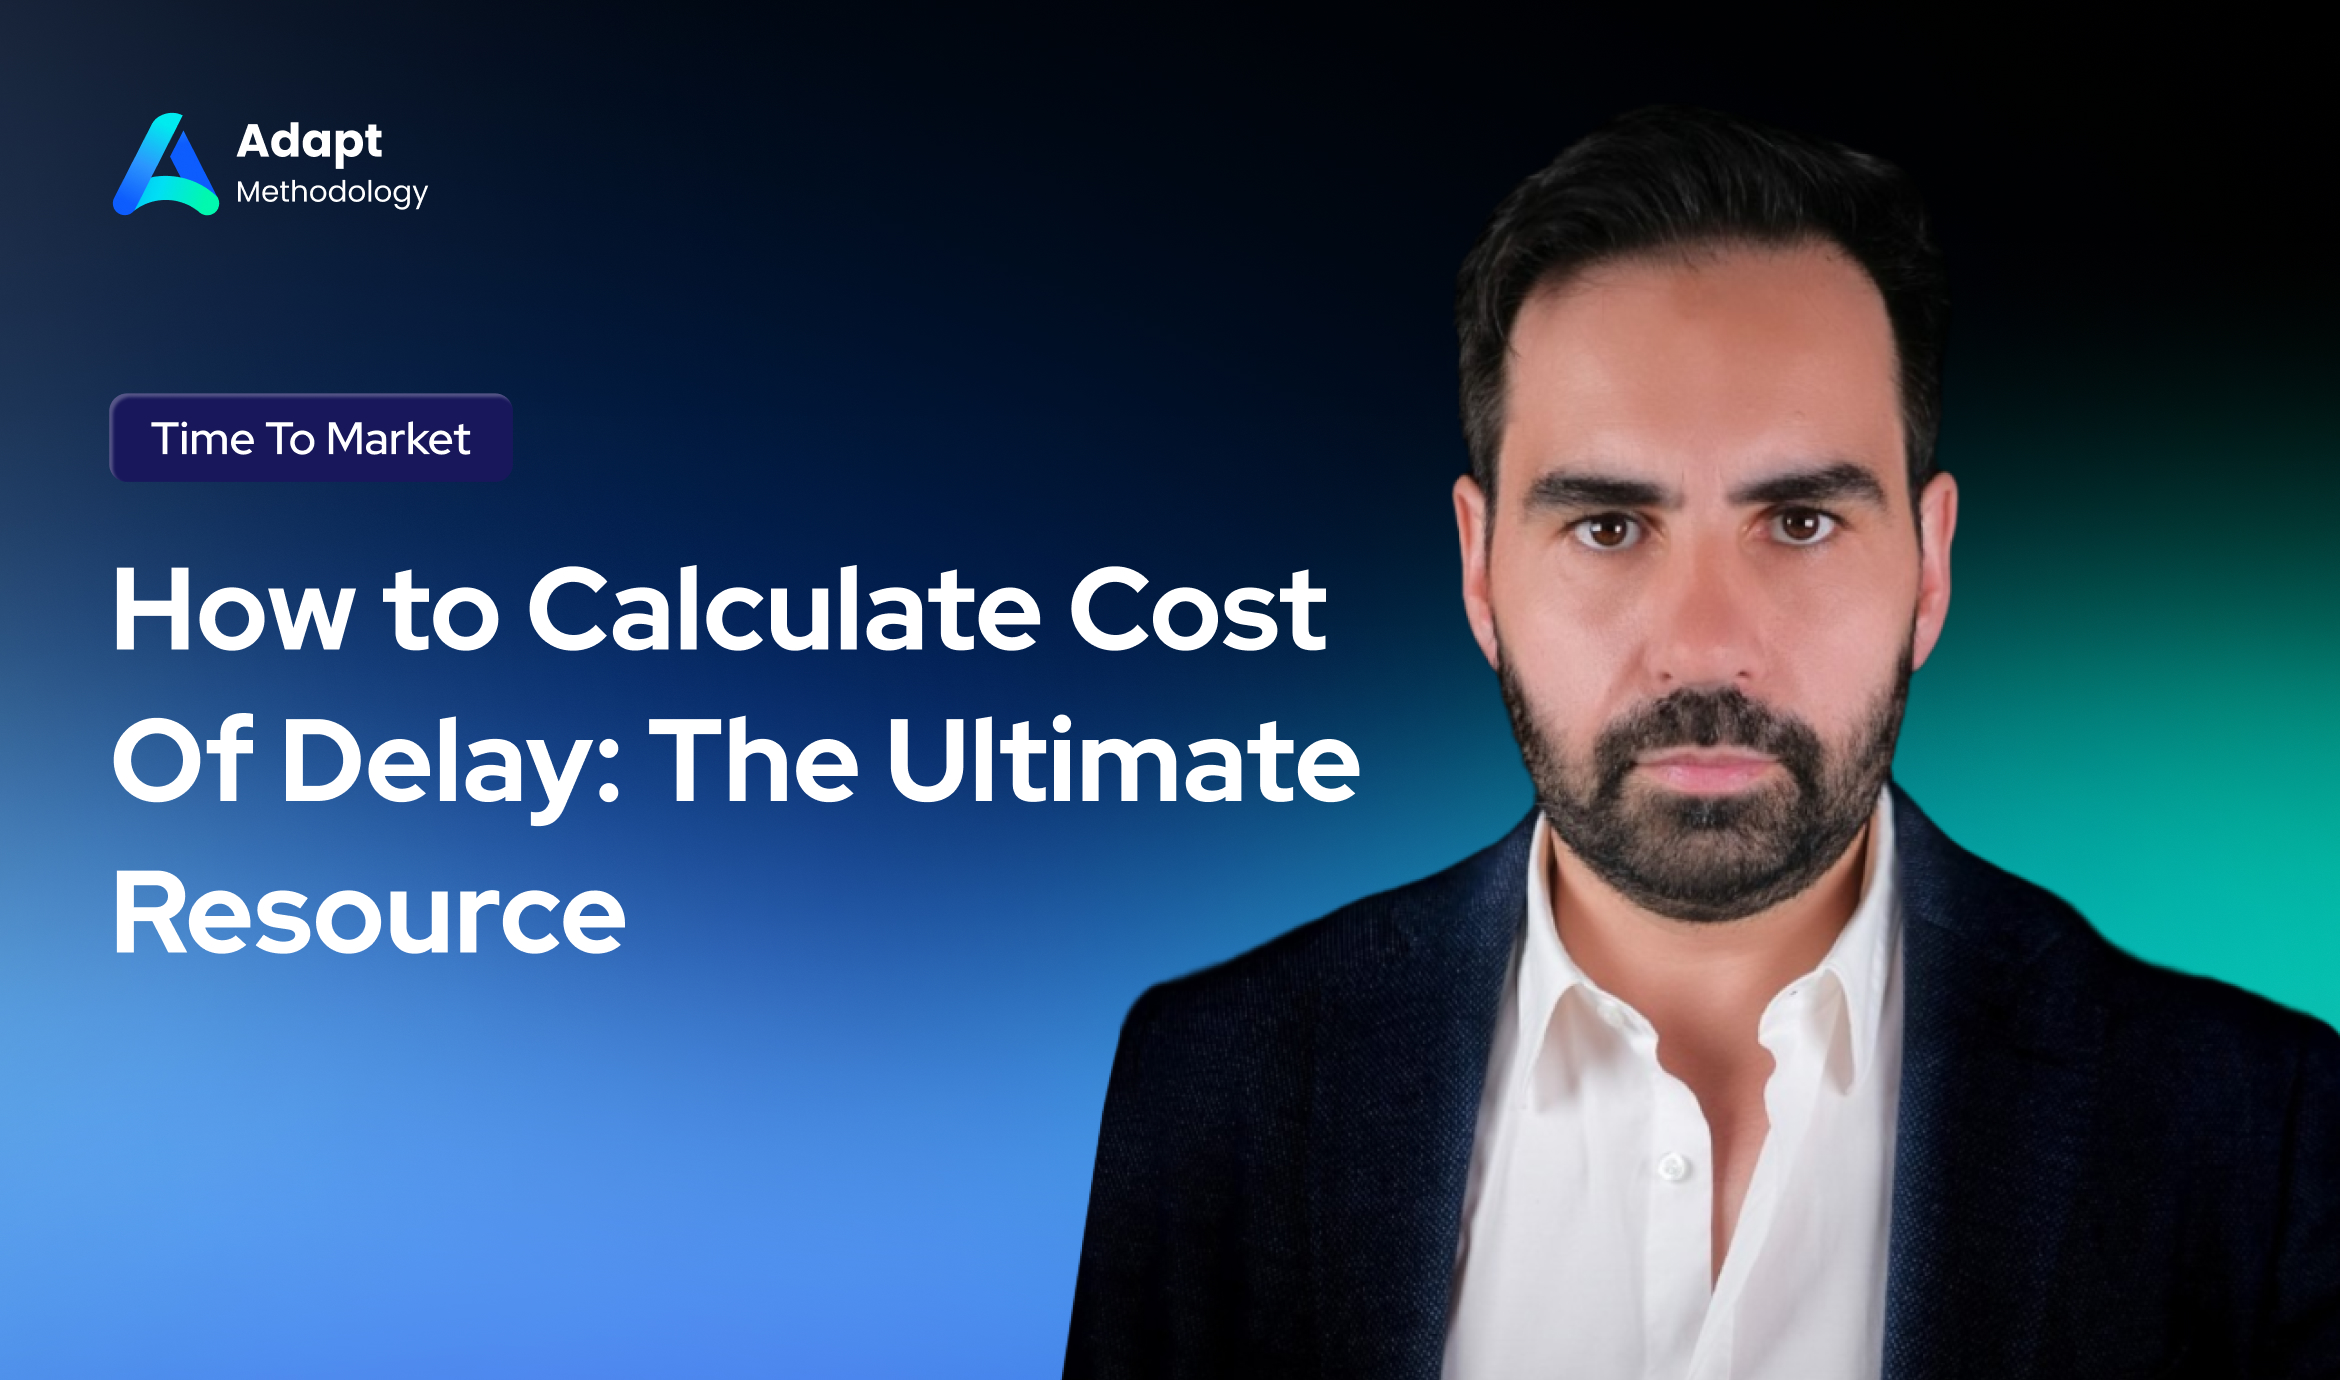 How to Calculate Cost Of Delay - The Ultimate Resource